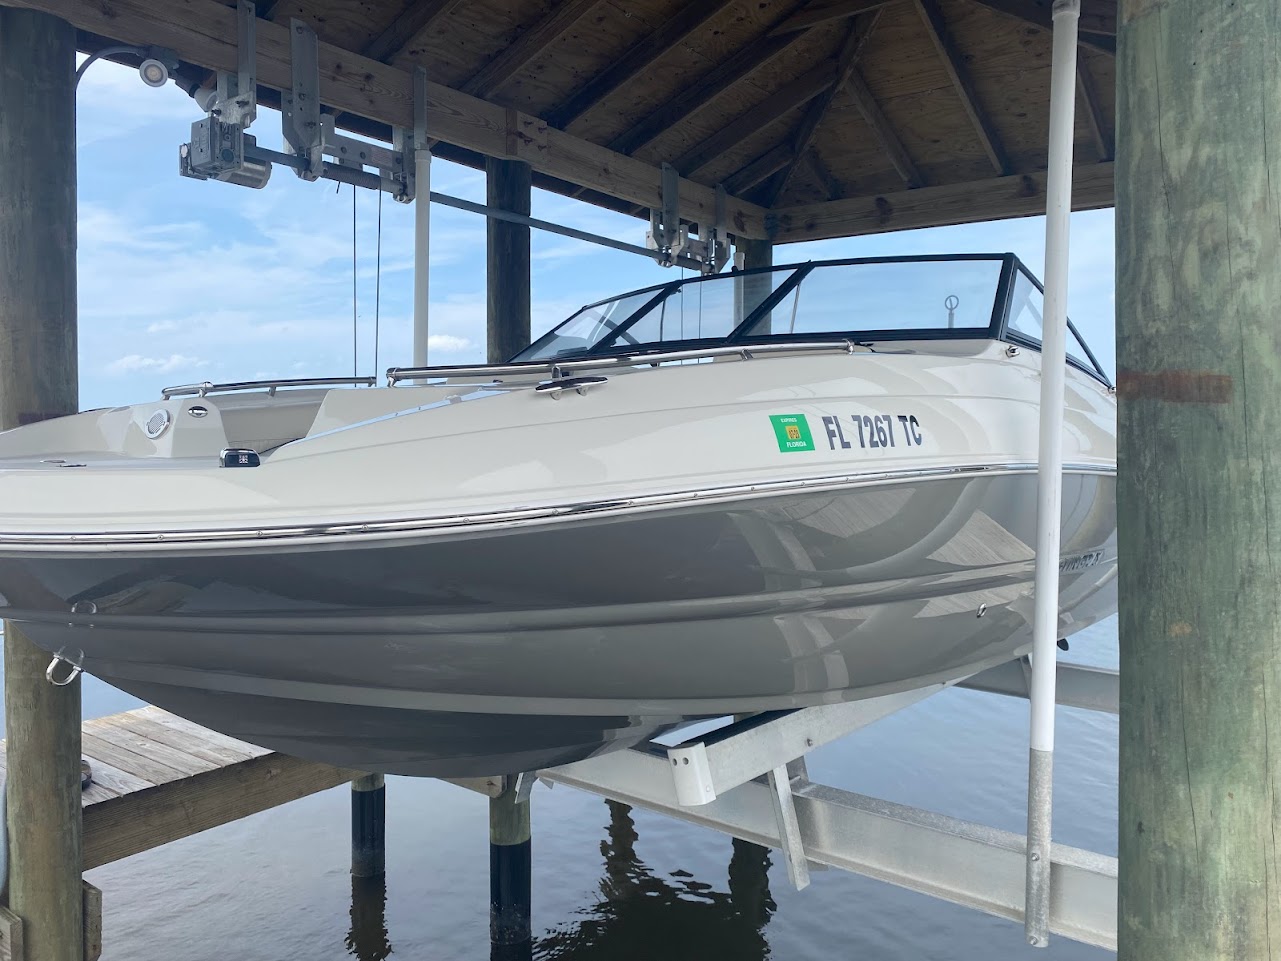 2022 Stingray 201DC Power boat for sale in Palm Coast, FL - image 2 